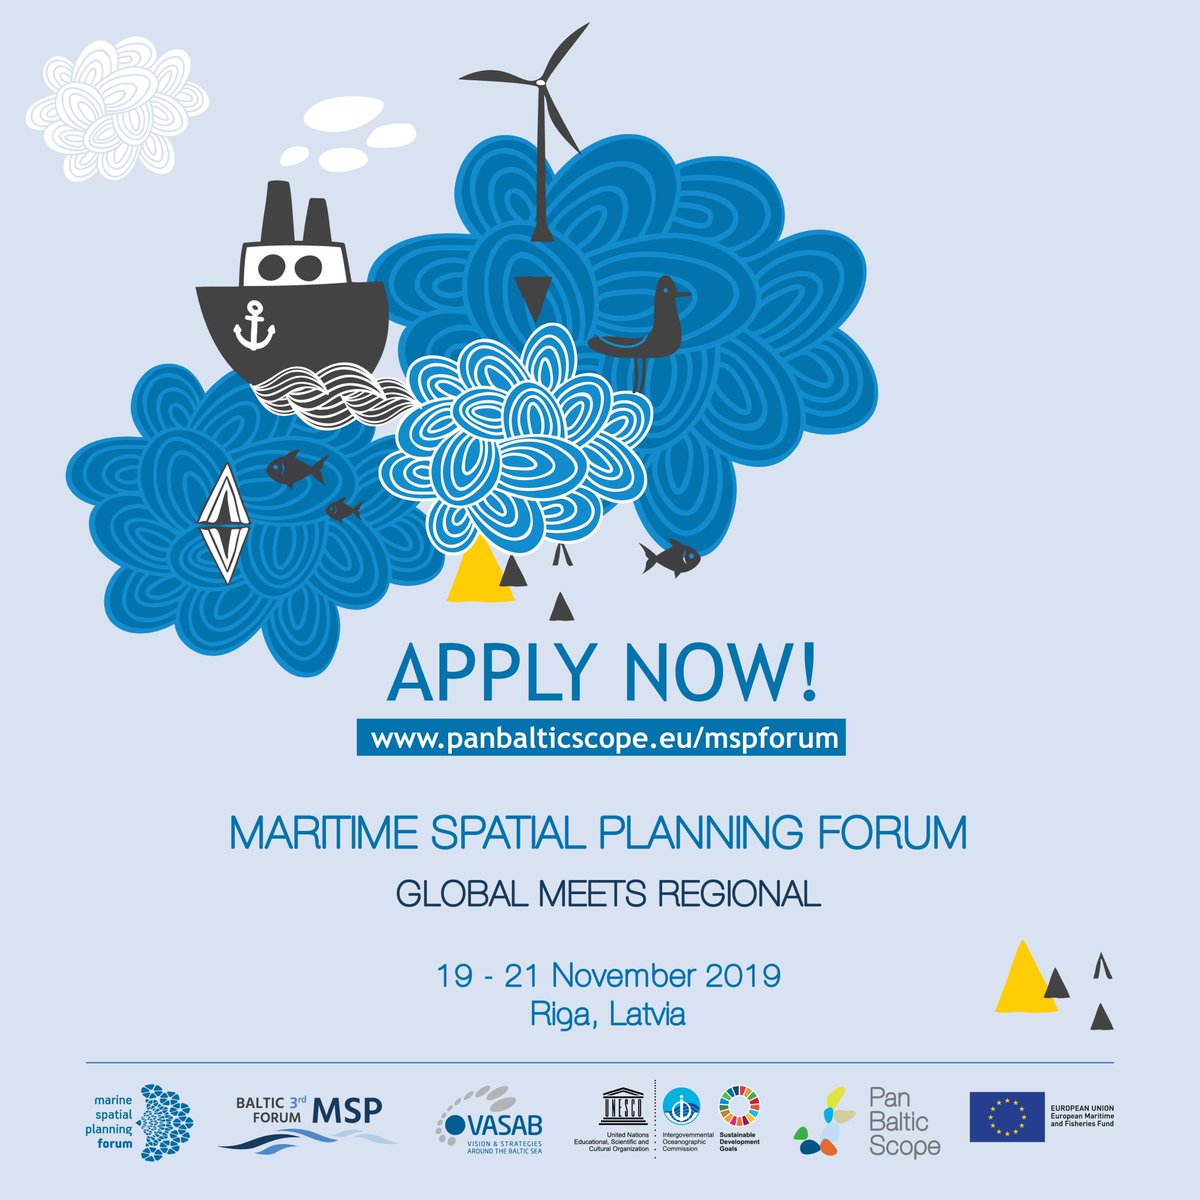 Today at #ESP10 conference in Hanover @PanBalticScope & Anda Ruskule @VARAM_Latvija are telling a story of mapping of marine green infrastructure to support #maritimespatialplanning in the Baltic Sea. More is coming at #MSPforum 2019 Riga. Join us!